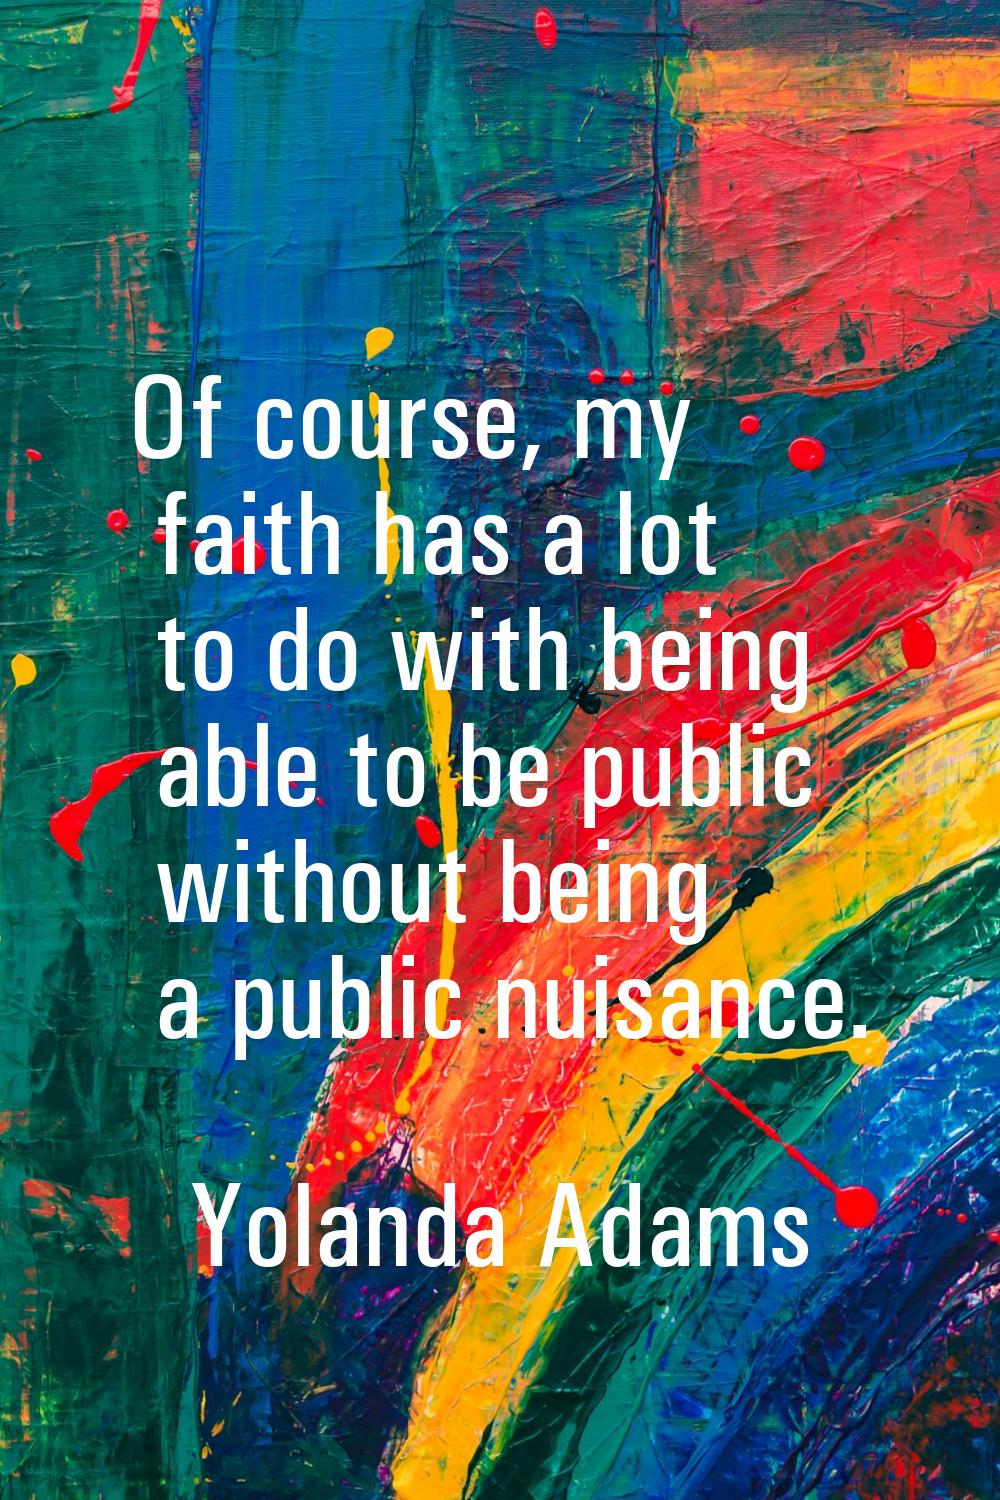 Of course, my faith has a lot to do with being able to be public without being a public nuisance.